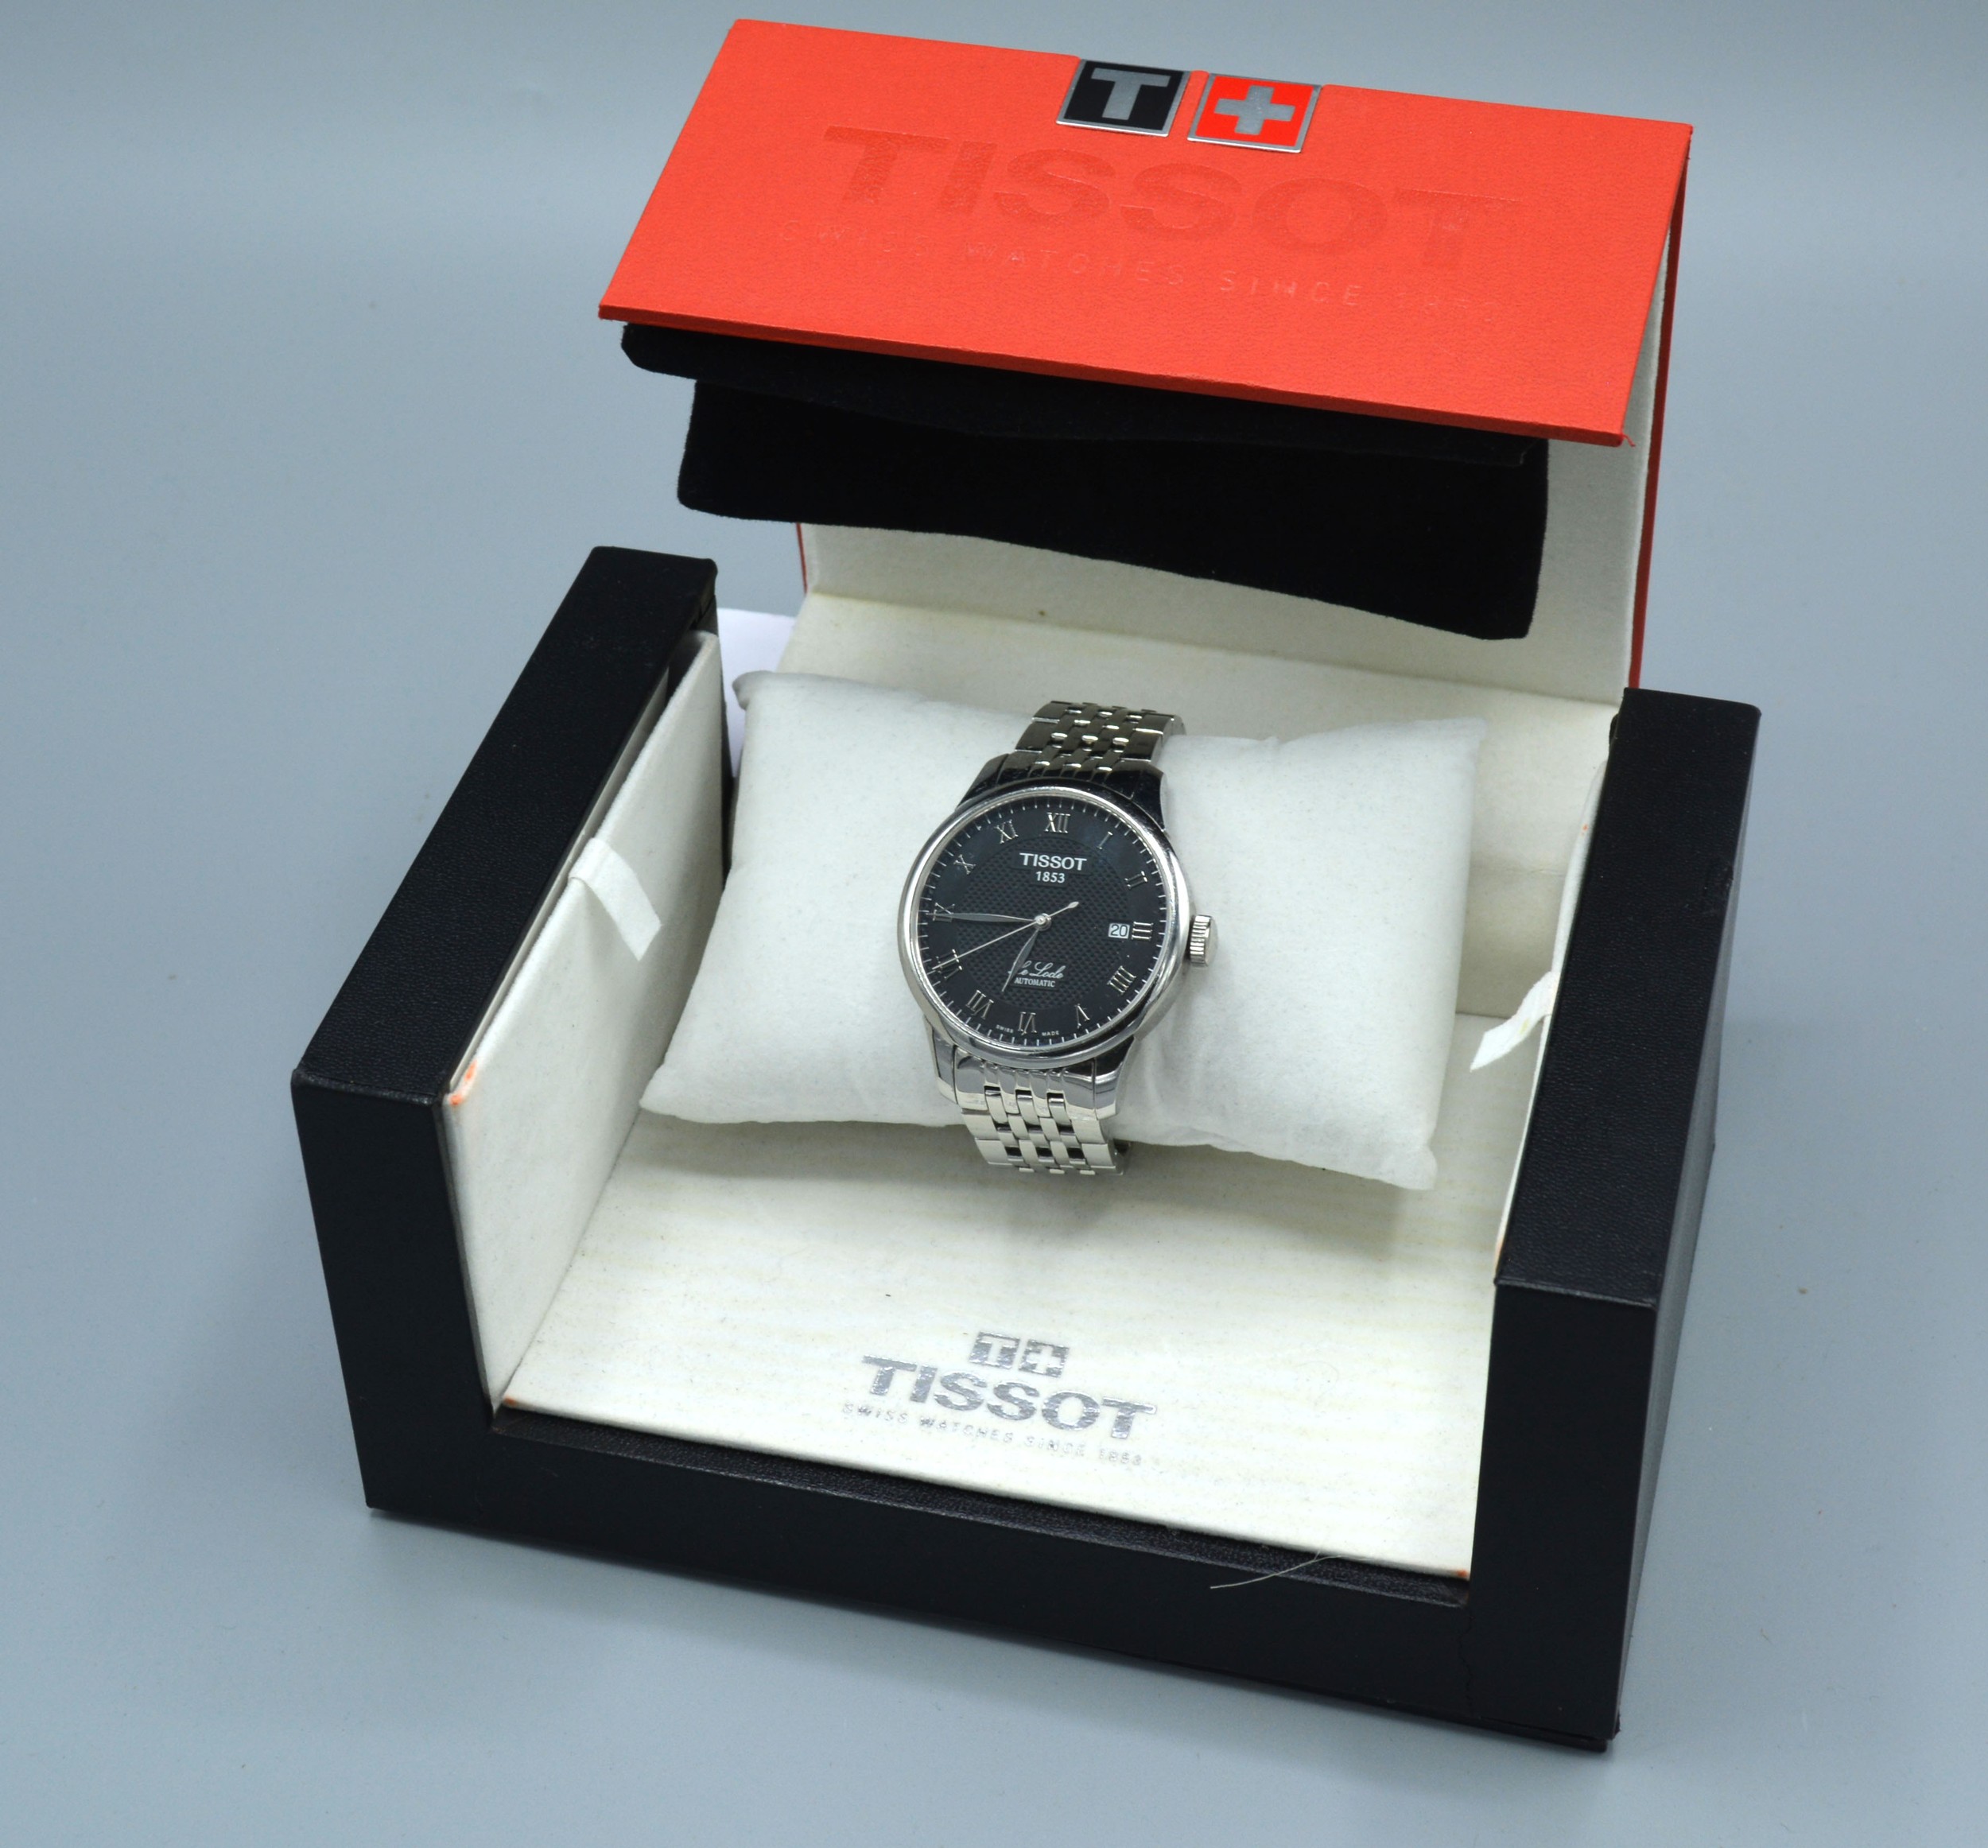 A Tissot Le Locle Automatic Stainless Steel Cased Gentleman's Wrist Watch with original box - Image 2 of 2